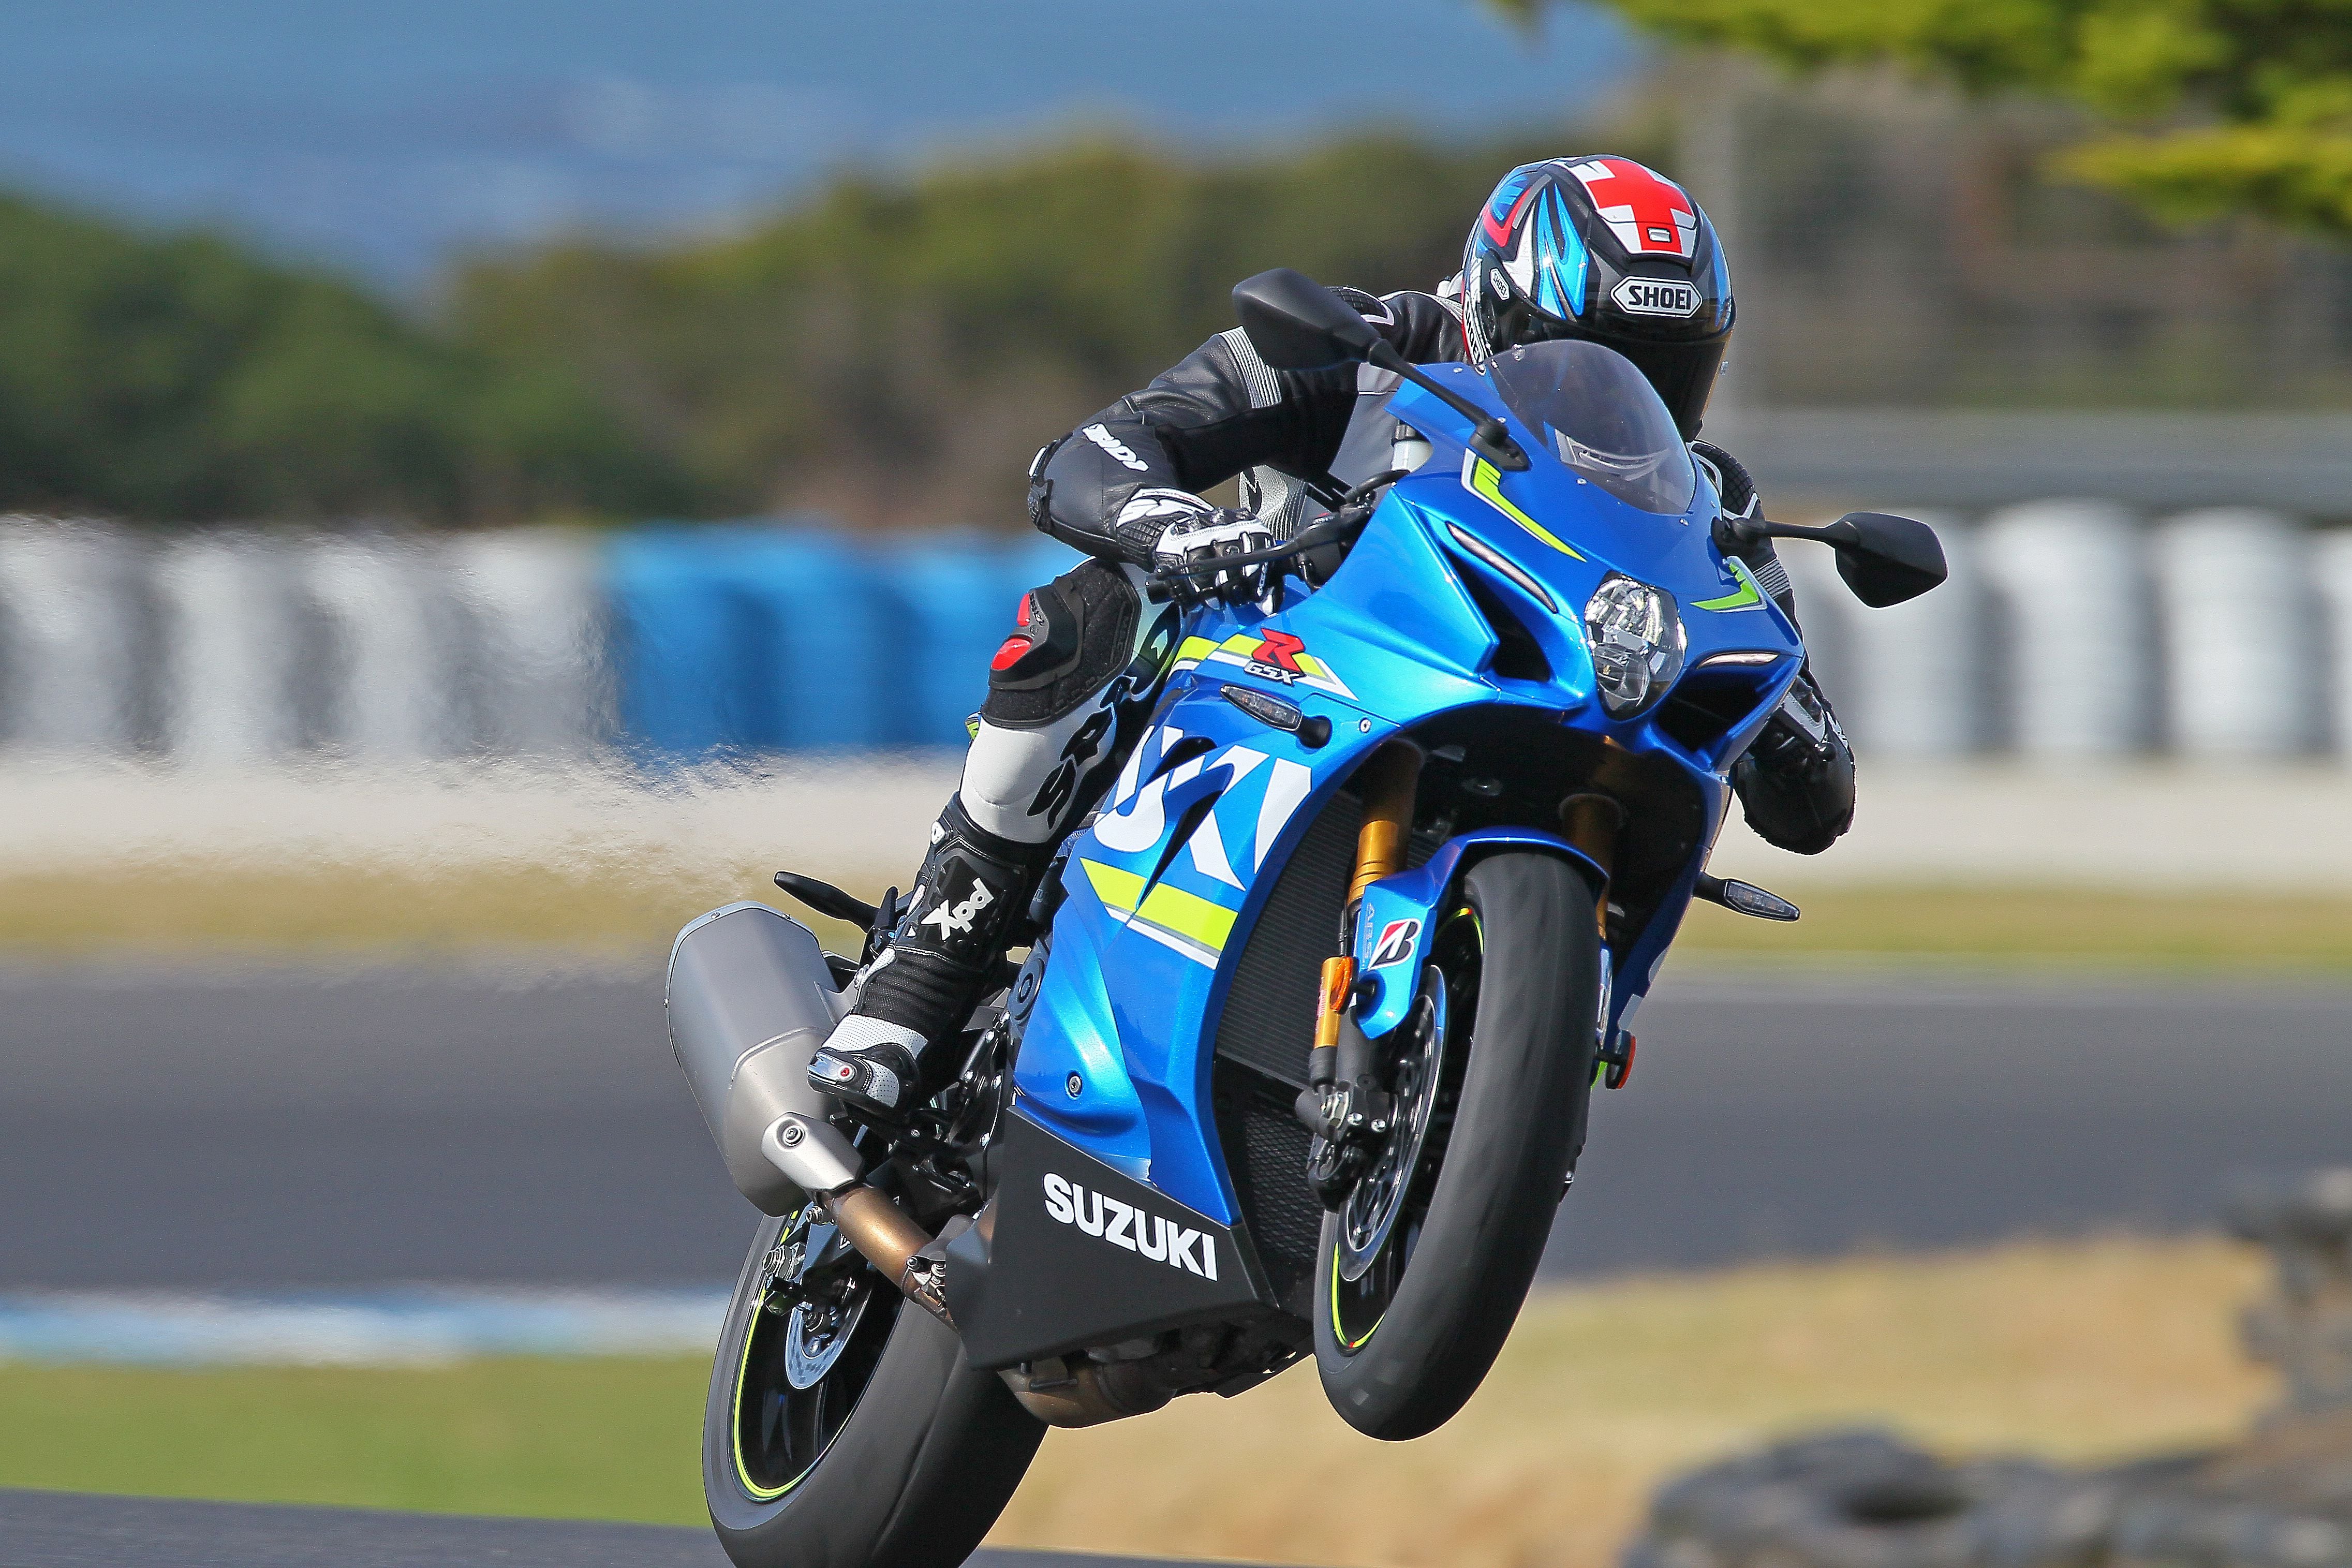 The GSX-R1000 was last updated in 2017.